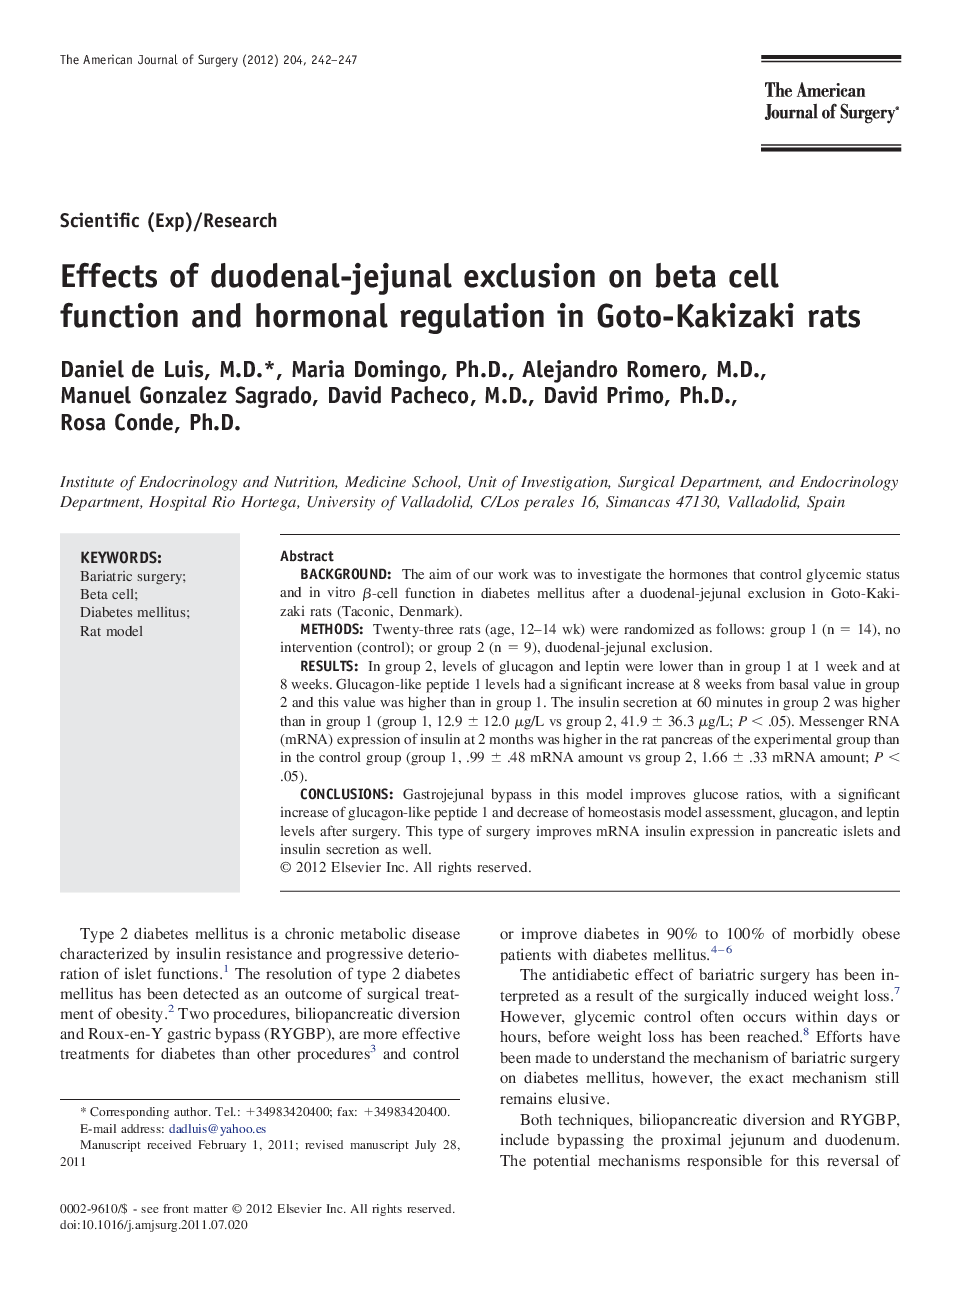 Effects of duodenal-jejunal exclusion on beta cell function and hormonal regulation in Goto-Kakizaki rats